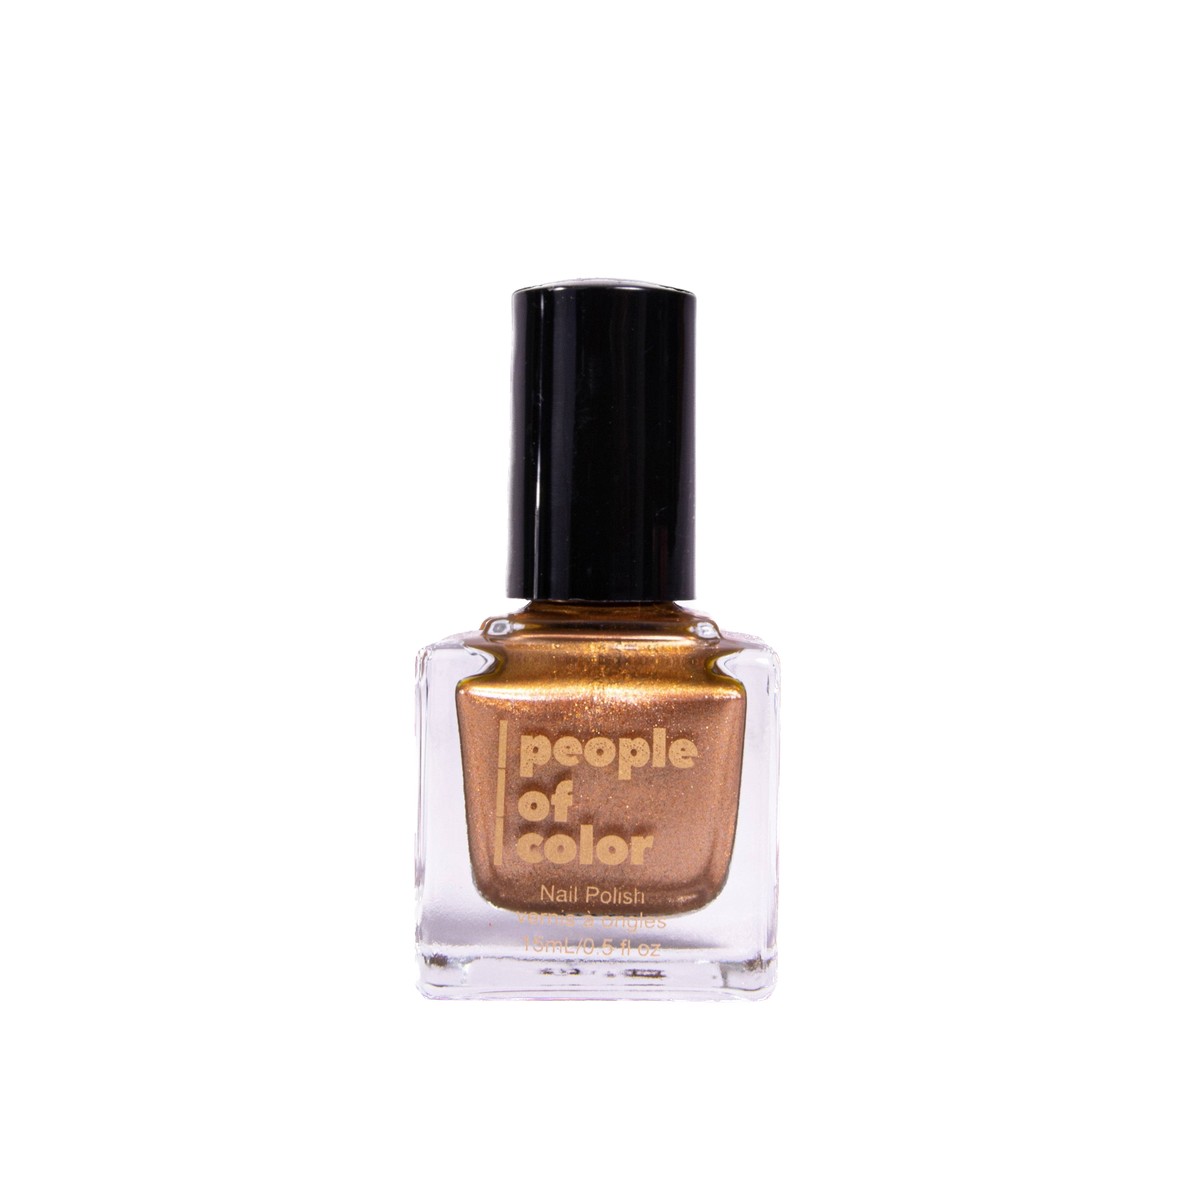 People of Color Vegan Nail Polish Bronzed Beauty color